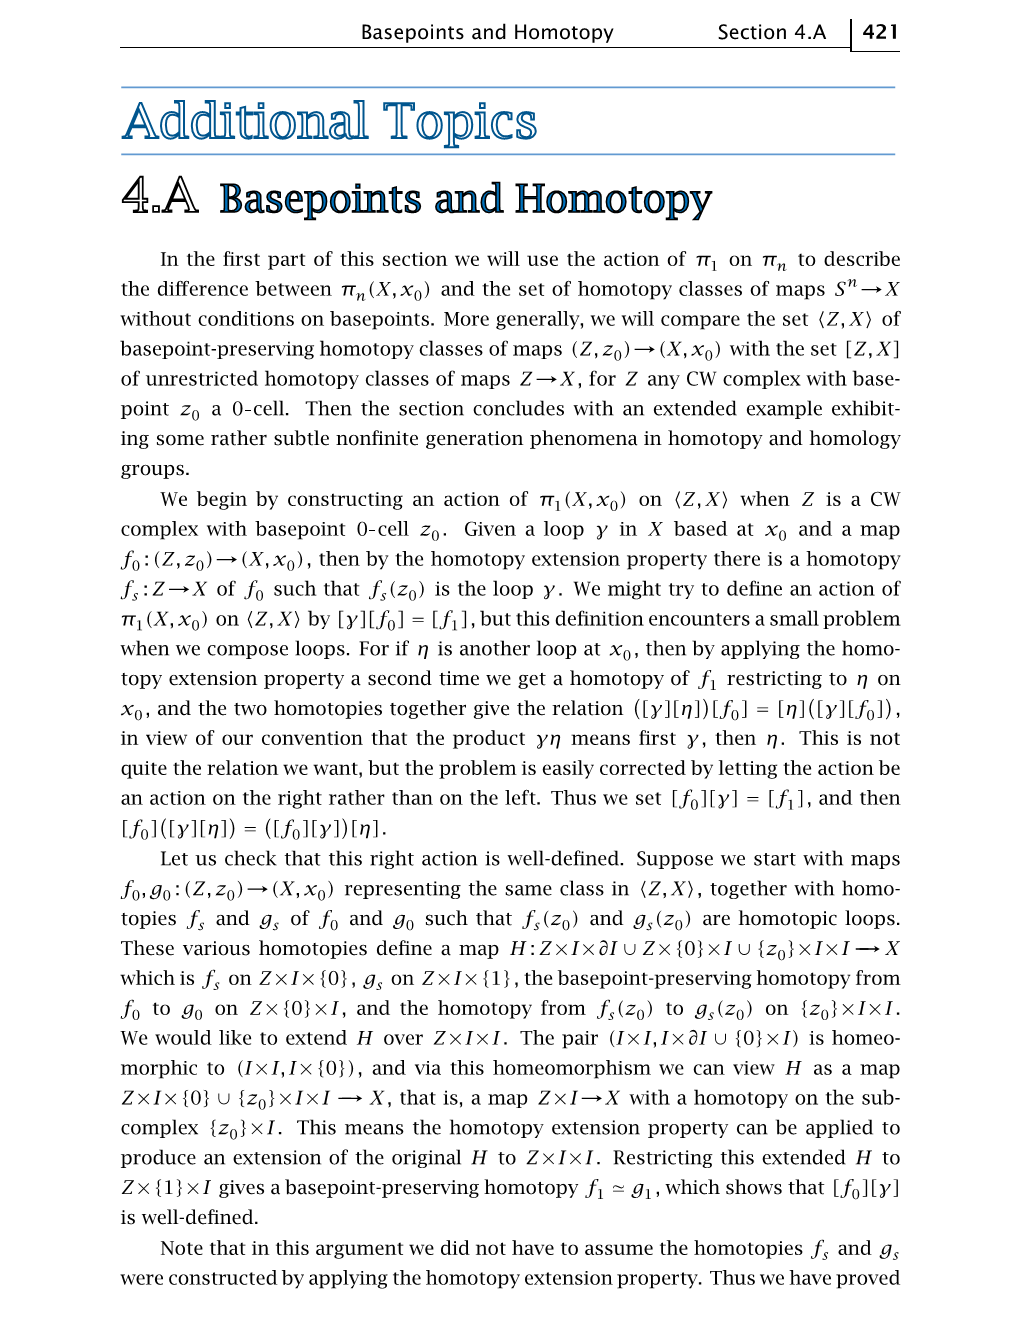 Basepoints and Homotopy Section 4.A 421 in the First Part of This Section We Will Use the Action of Π1 on Πn to Describe the D